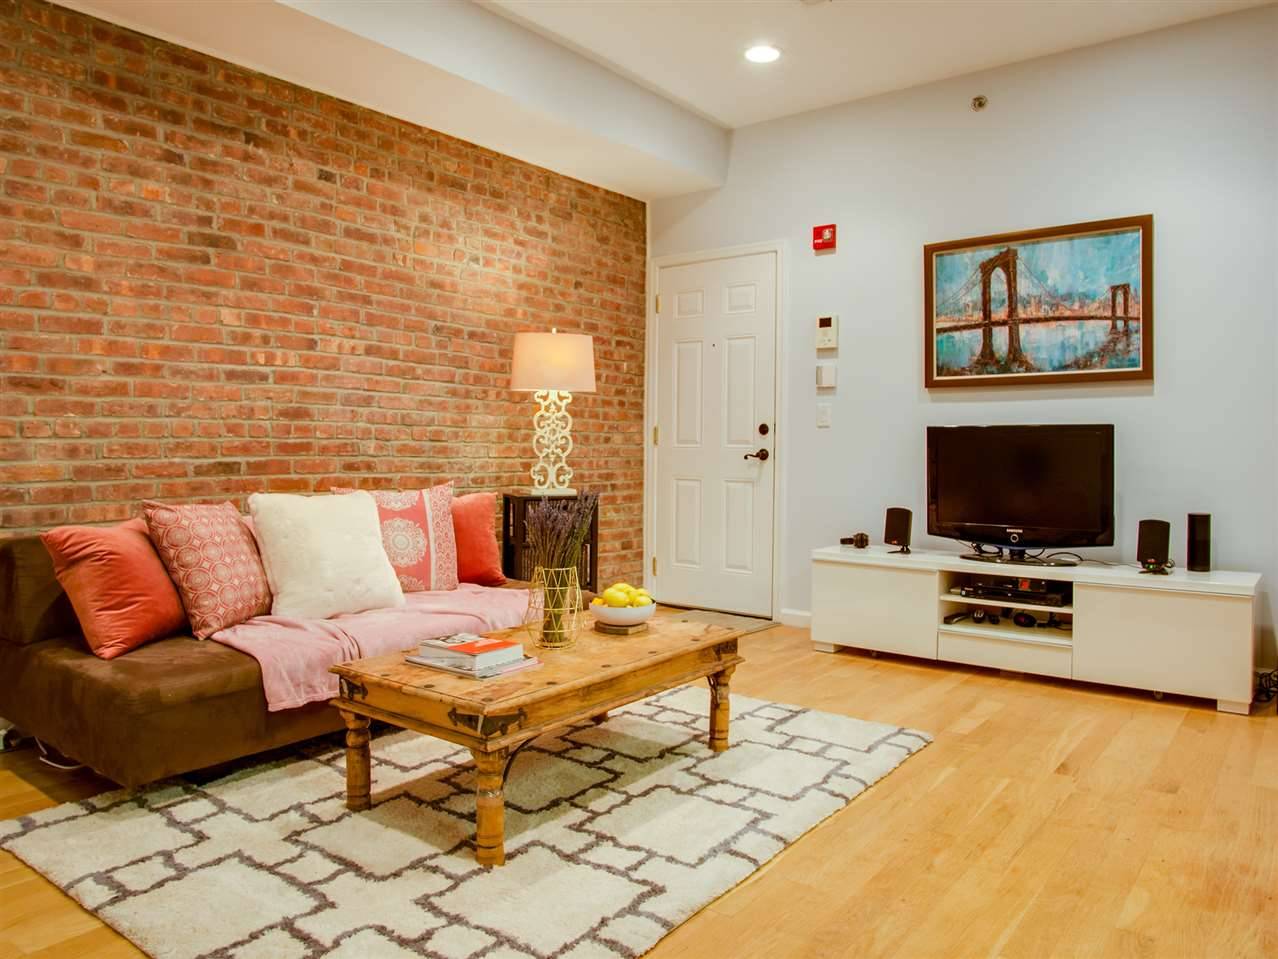 Historic charm meets modern living in this 2 bed/2bath condo at the Juliette